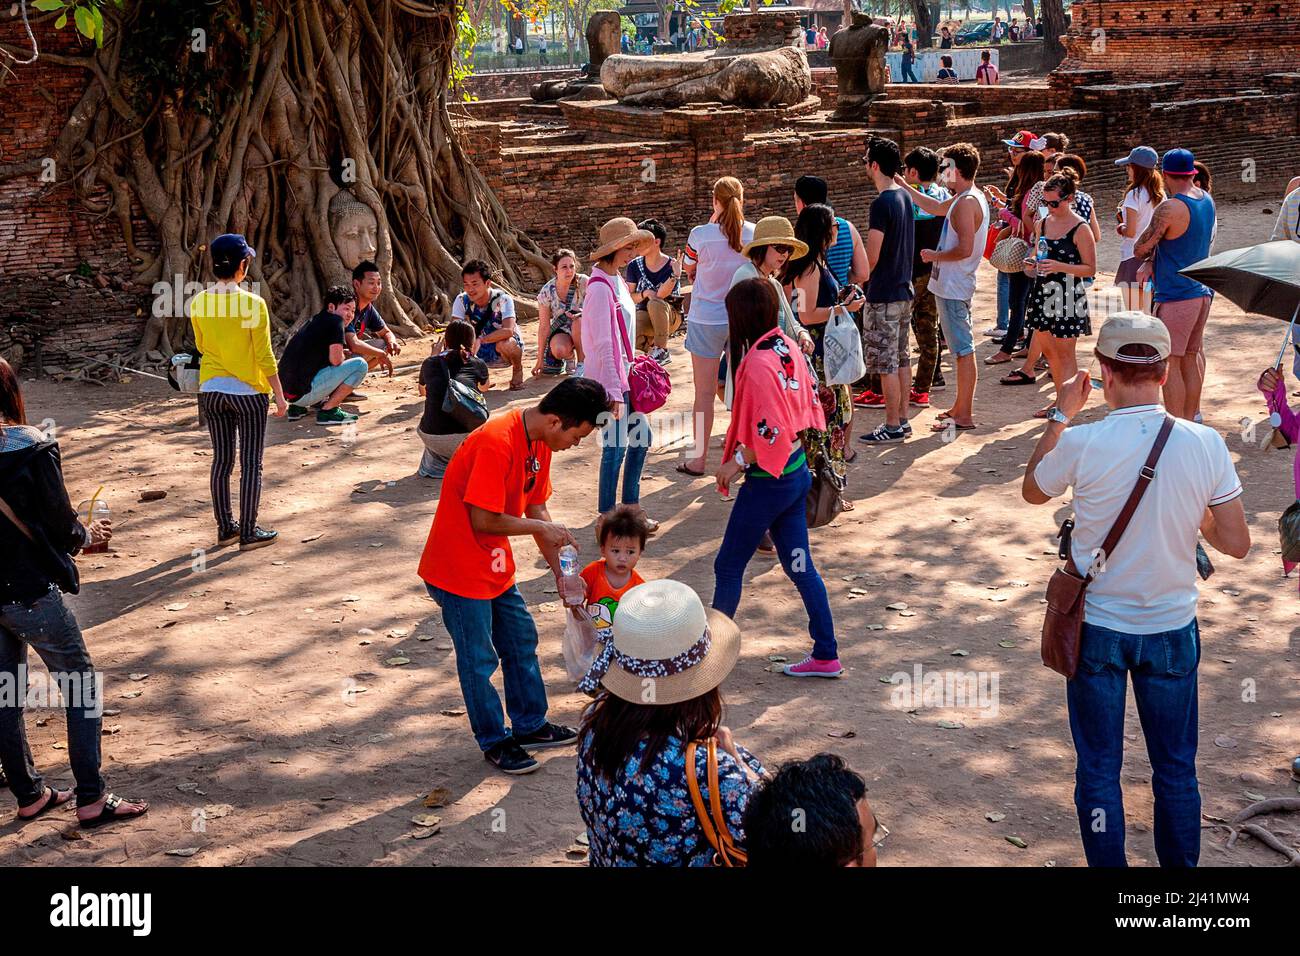 A group of tourists take each others picture in front of the Buddha face in the banyan tree. Stock Photo